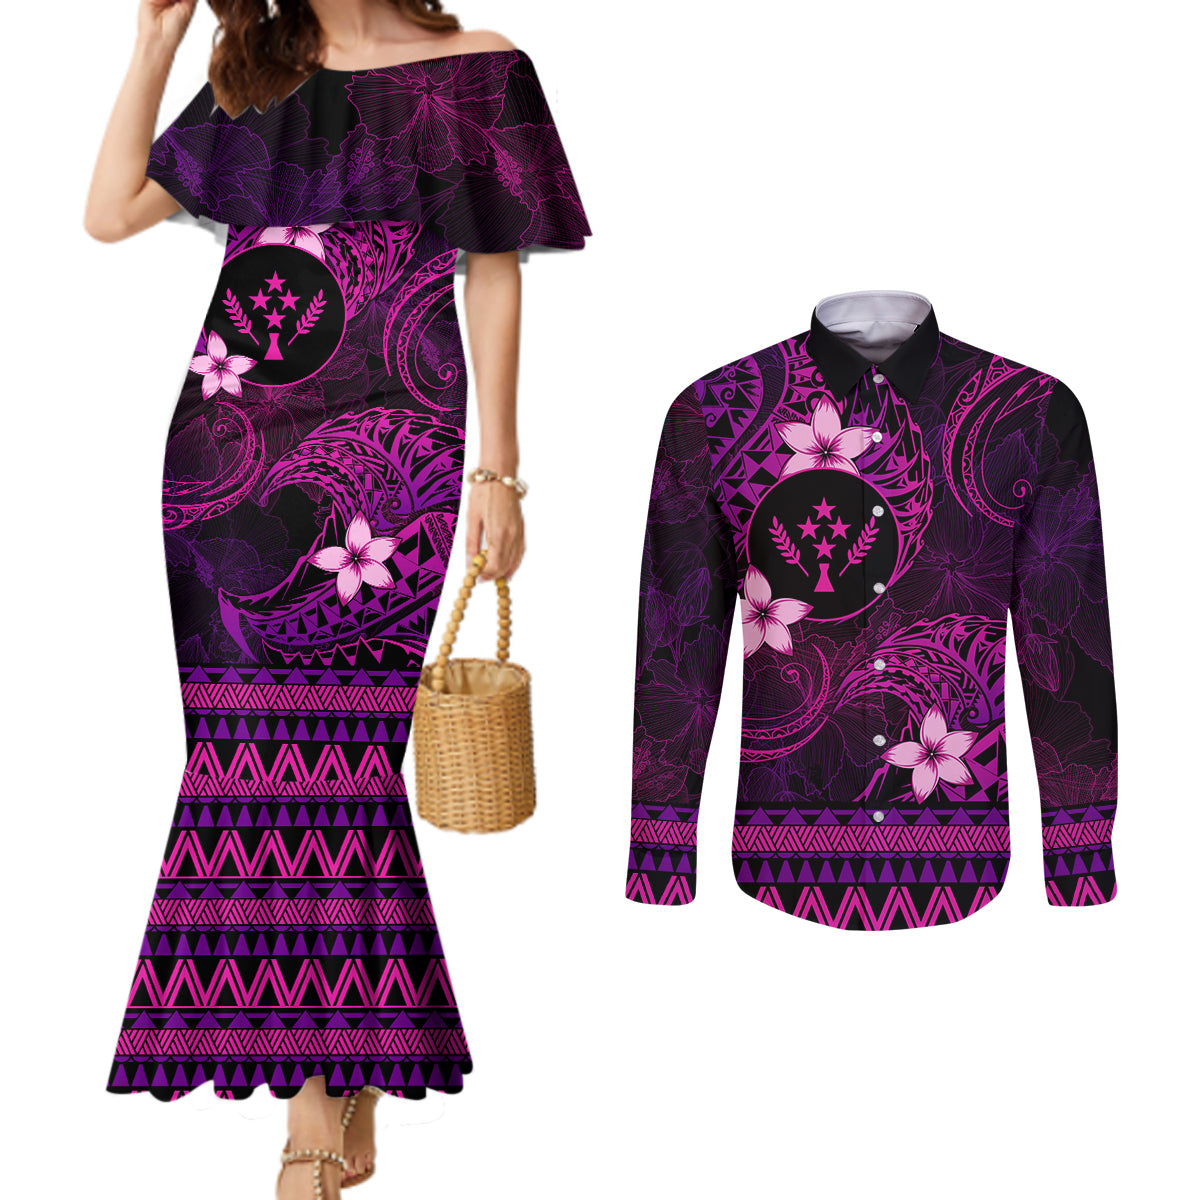 FSM Kosrae State Couples Matching Mermaid Dress and Long Sleeve Button Shirt Tribal Pattern Pink Version LT01 Pink - Polynesian Pride